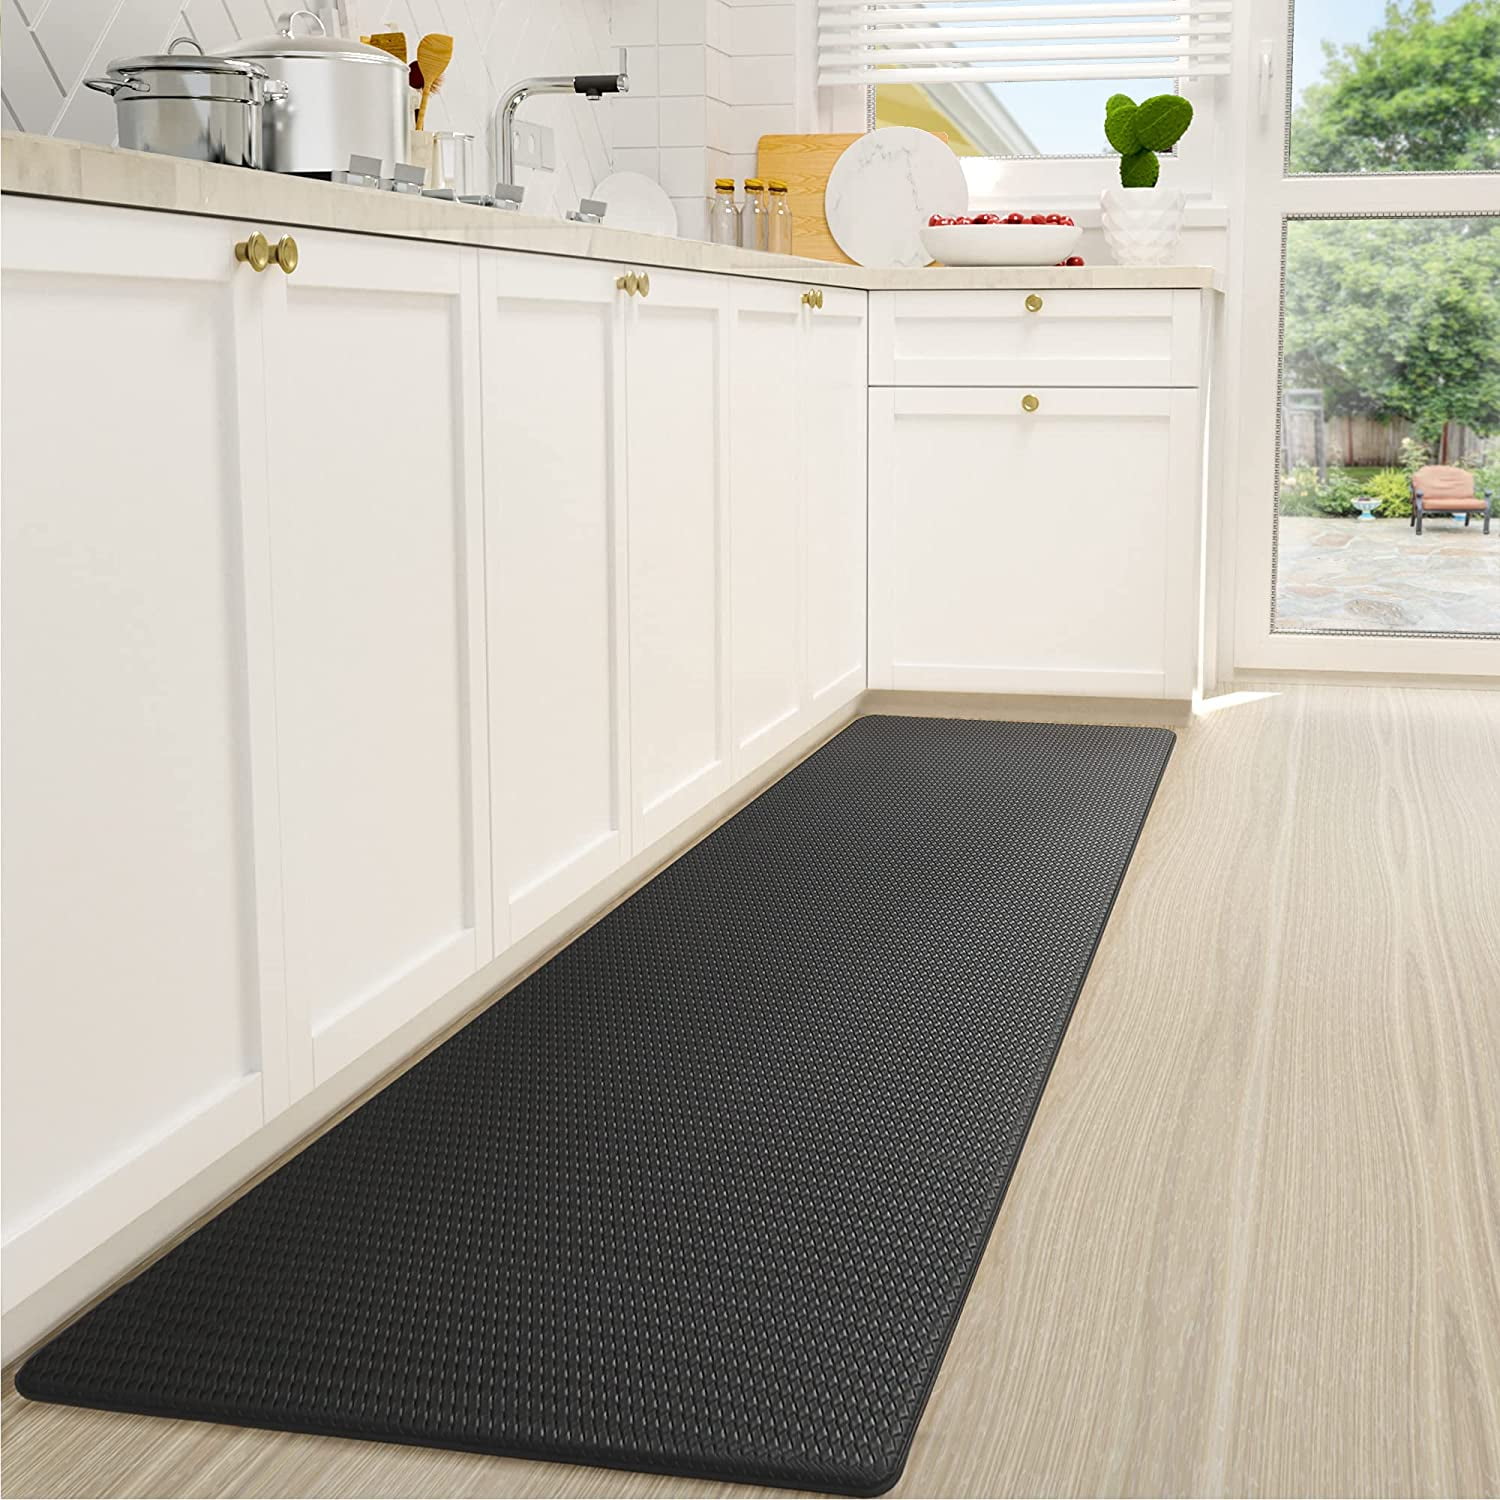 Waterproof Farmhouse Style Kitchen Carpet Comfort Kitchen Sink Rug for Standing Non Skid Washable Kitchen Floor Mat for in Front of Sink Soft & Durable Kitchen Mats and Rugs for Floor 